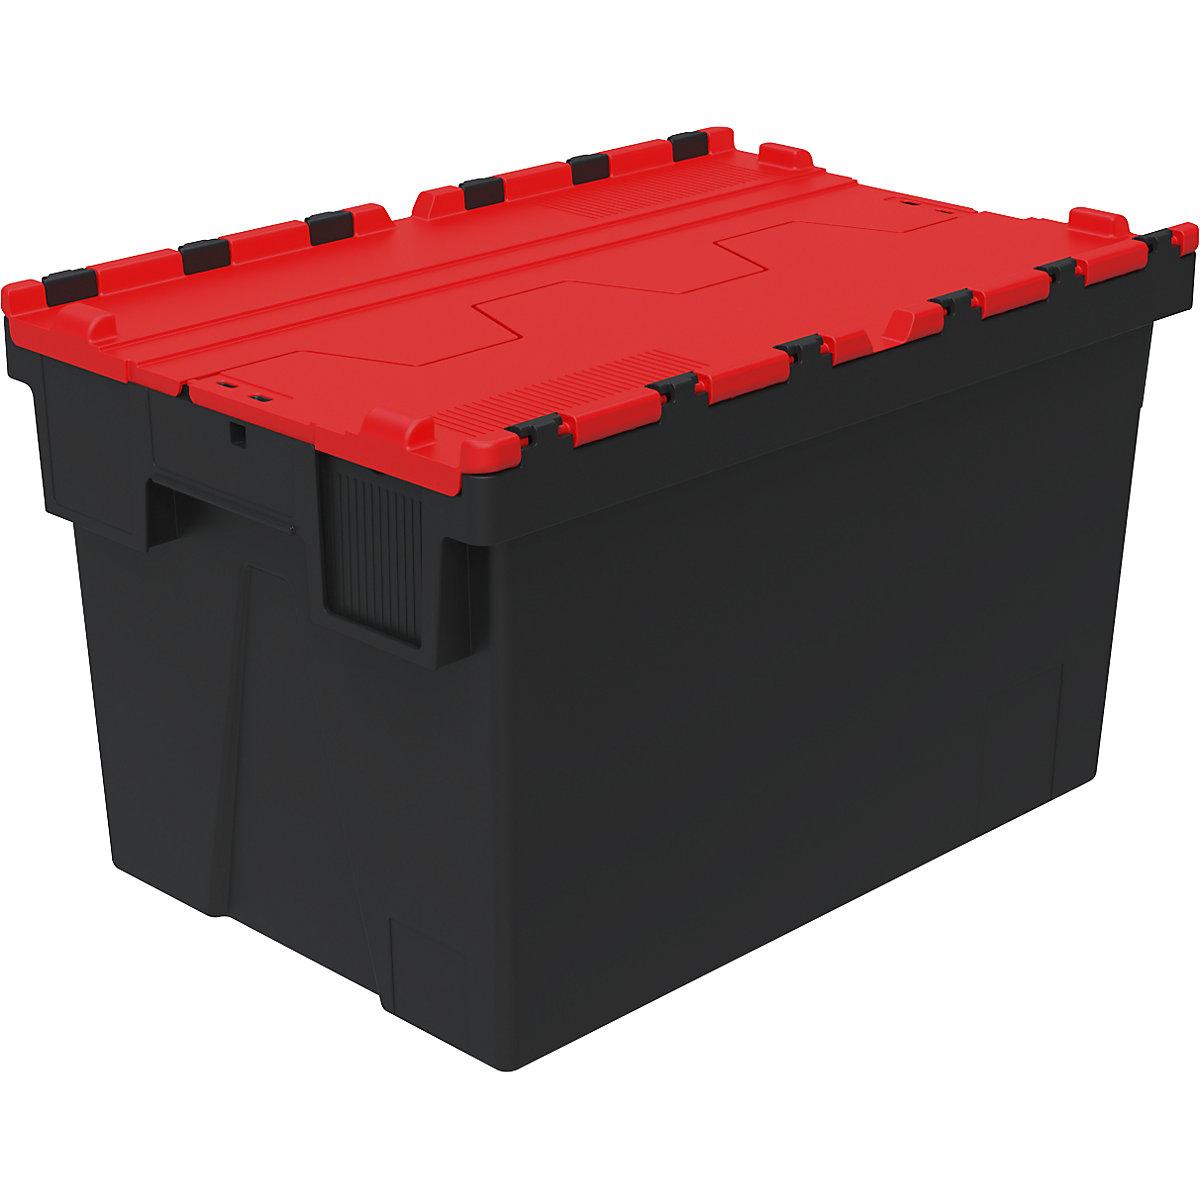 Reusable stacking container, LxWxH 600 x 400 x 400 mm, black/red-4